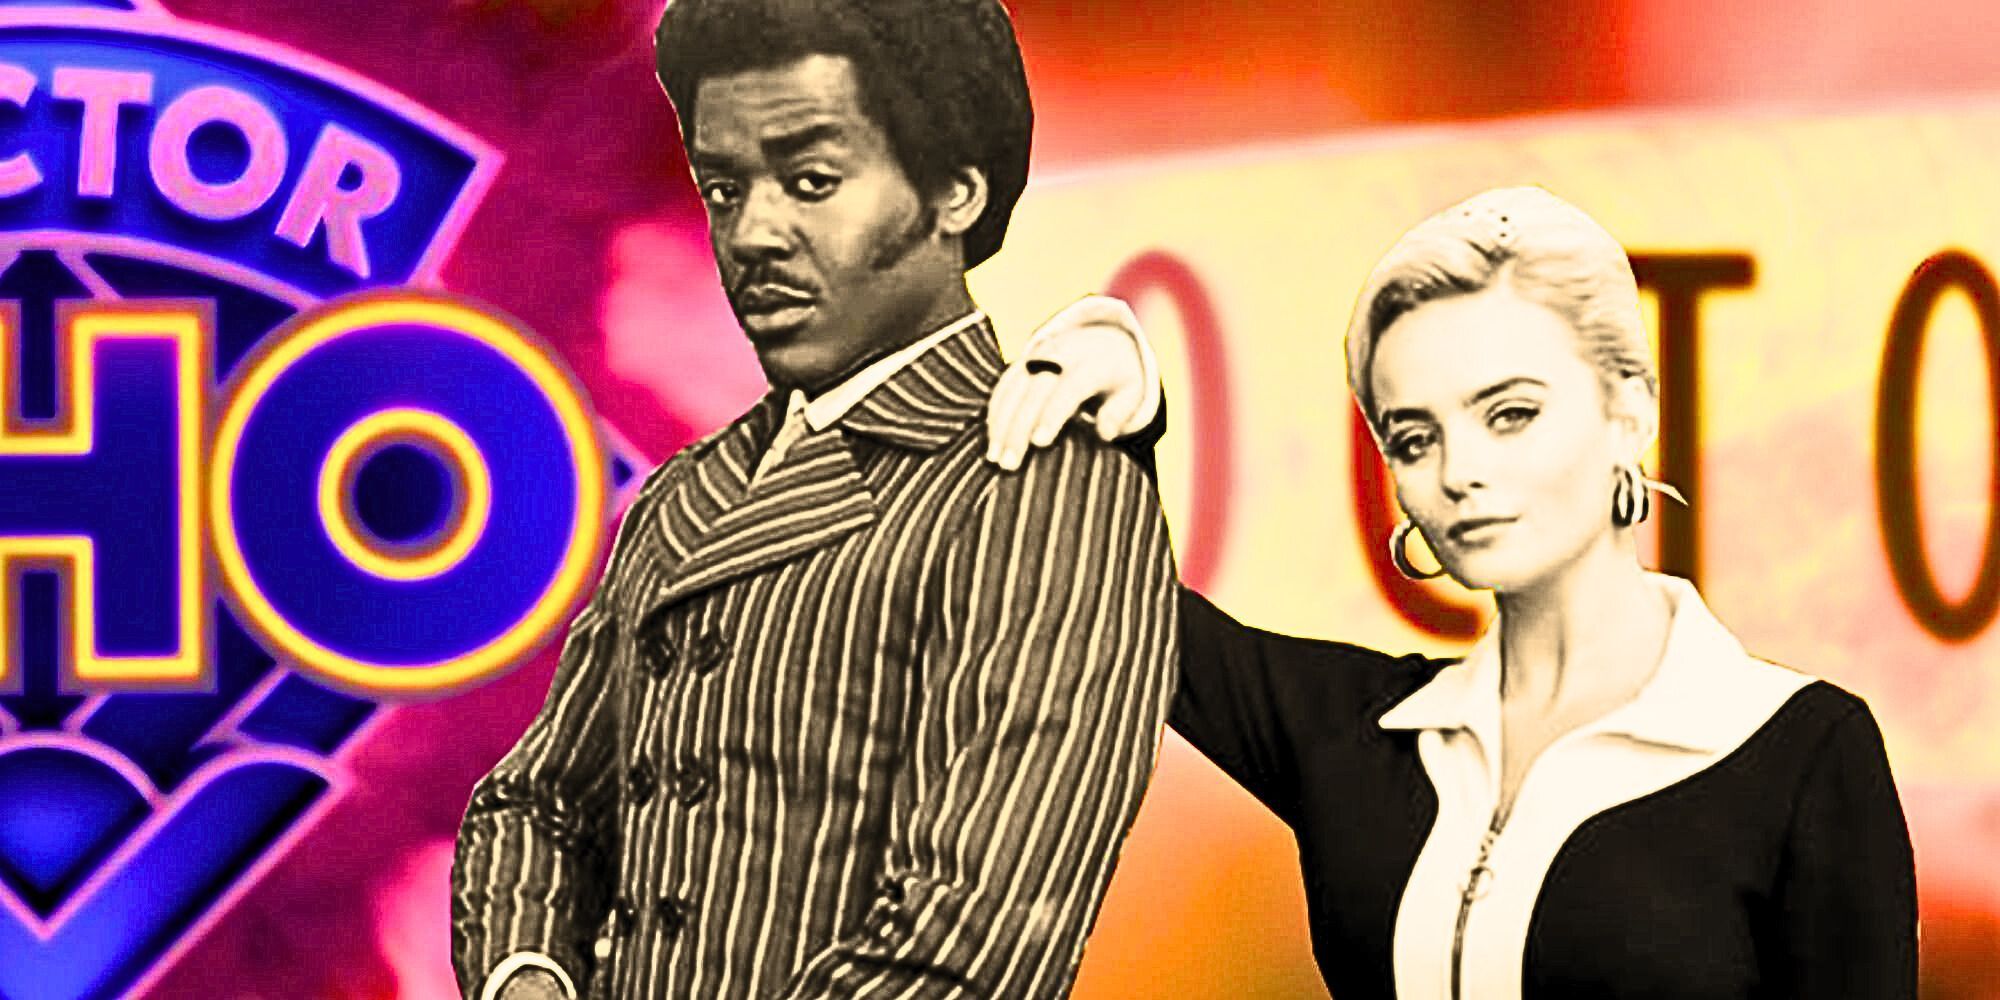 Ncuti Gatwa's Fifteenth Doctor and Millie Gibson as Ruby Sunday against a blended backdrop of various Doctor Who titlecards